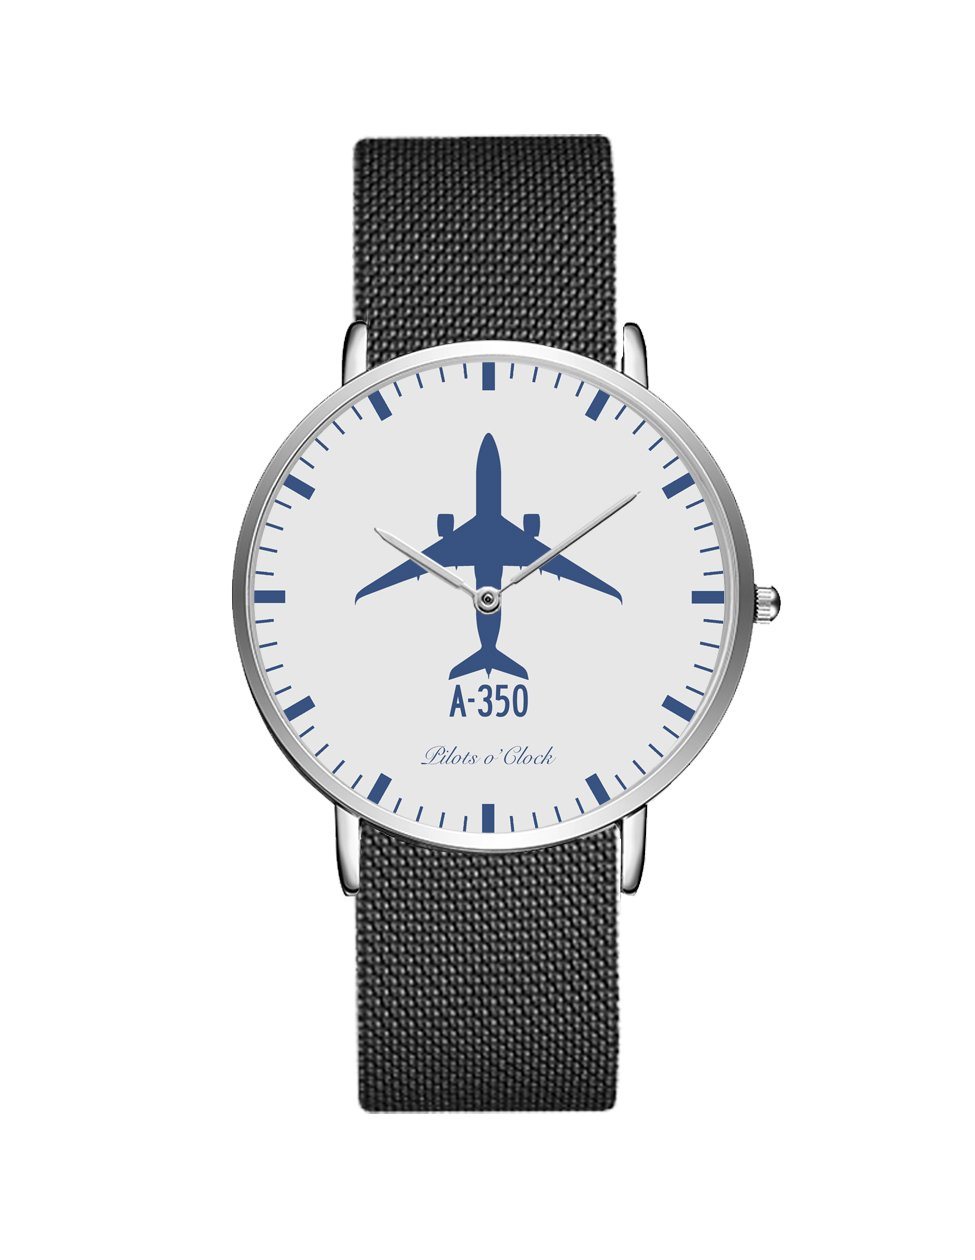 Airbus A350 Stainless Steel Strap Watches Pilot Eyes Store Silver & Black Stainless Steel Strap 